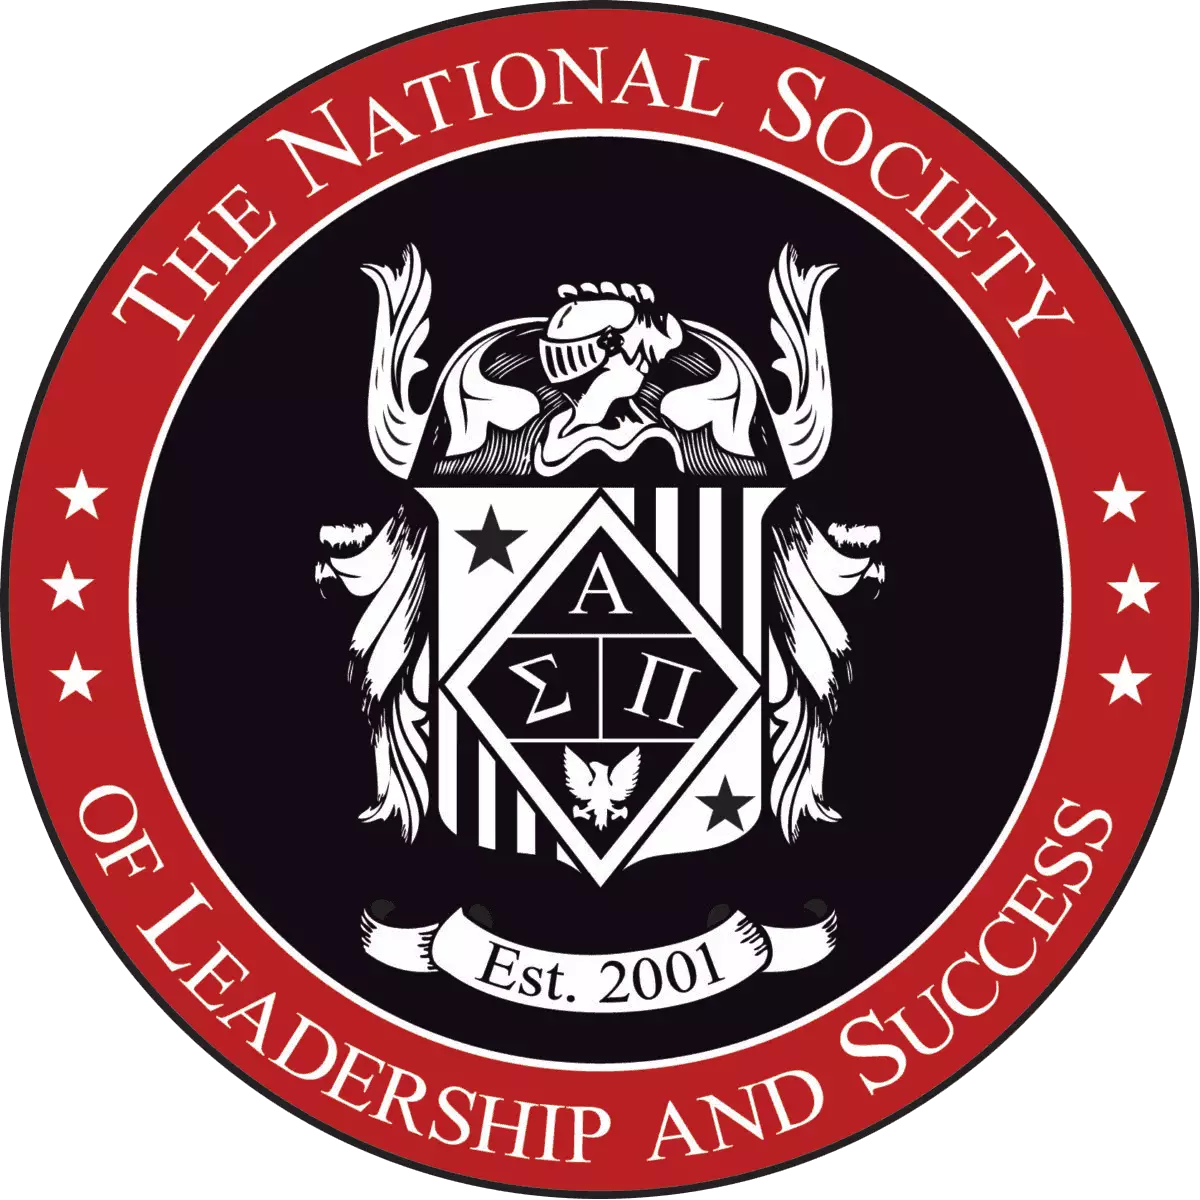 The National Society of Leadership and Success seal